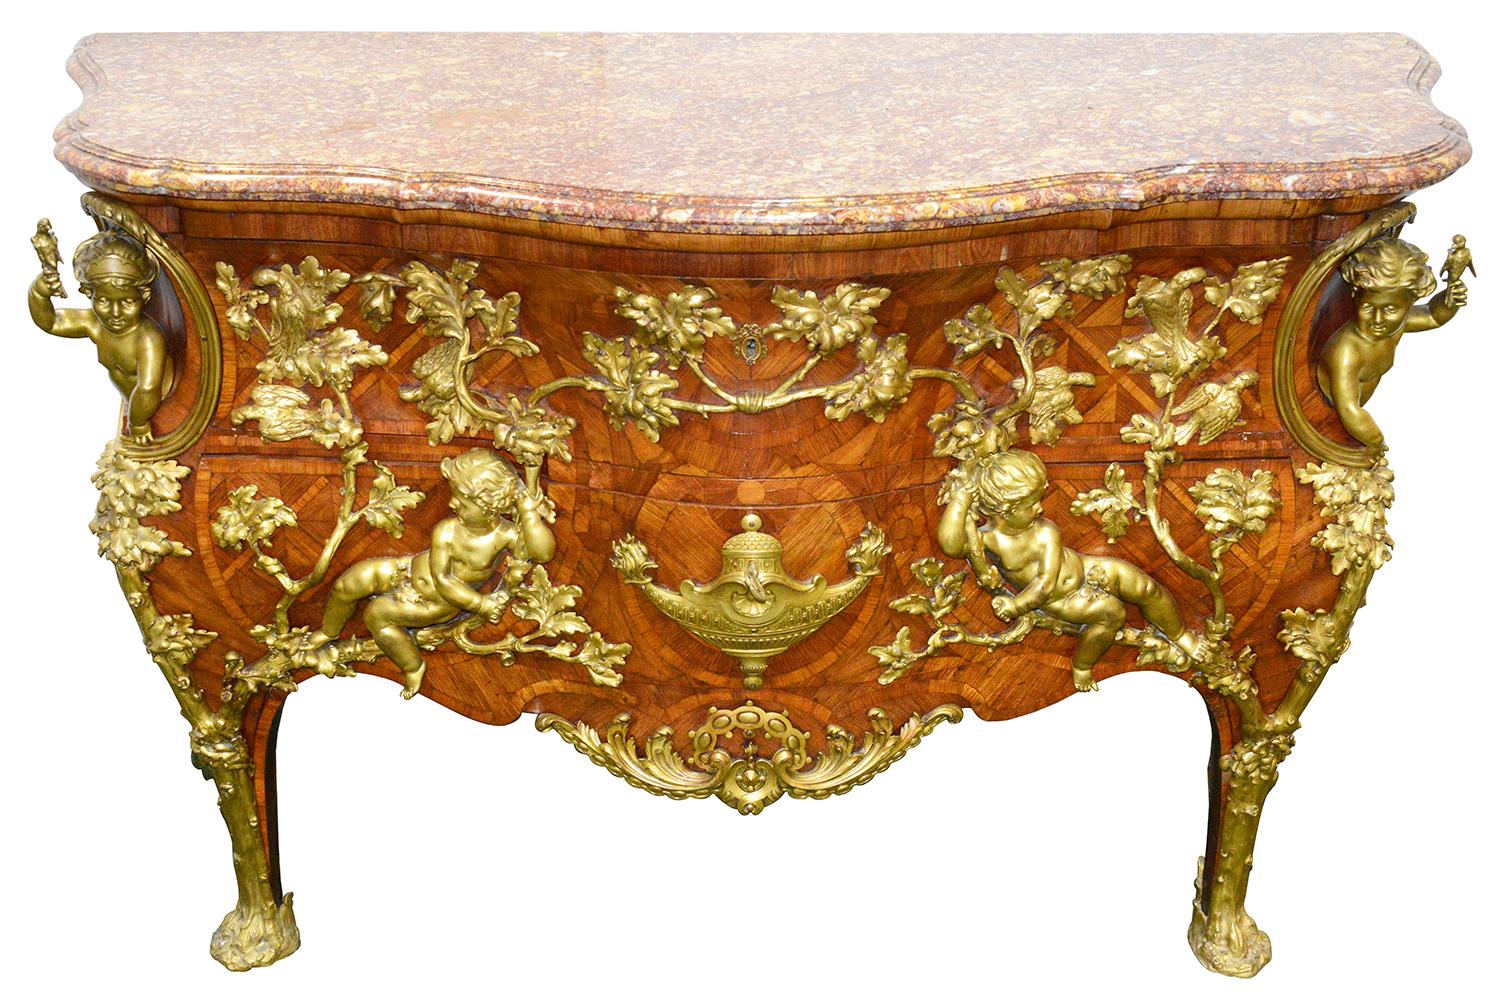 An important French mid-19th century gilt-bronze mounted kingwood, satiné and parquetry bombé commode after the model by Charles Cressent
attributed to Maison Millet, Paris
the serpentine Brocatelle Violette d'Espagne marble top above two long